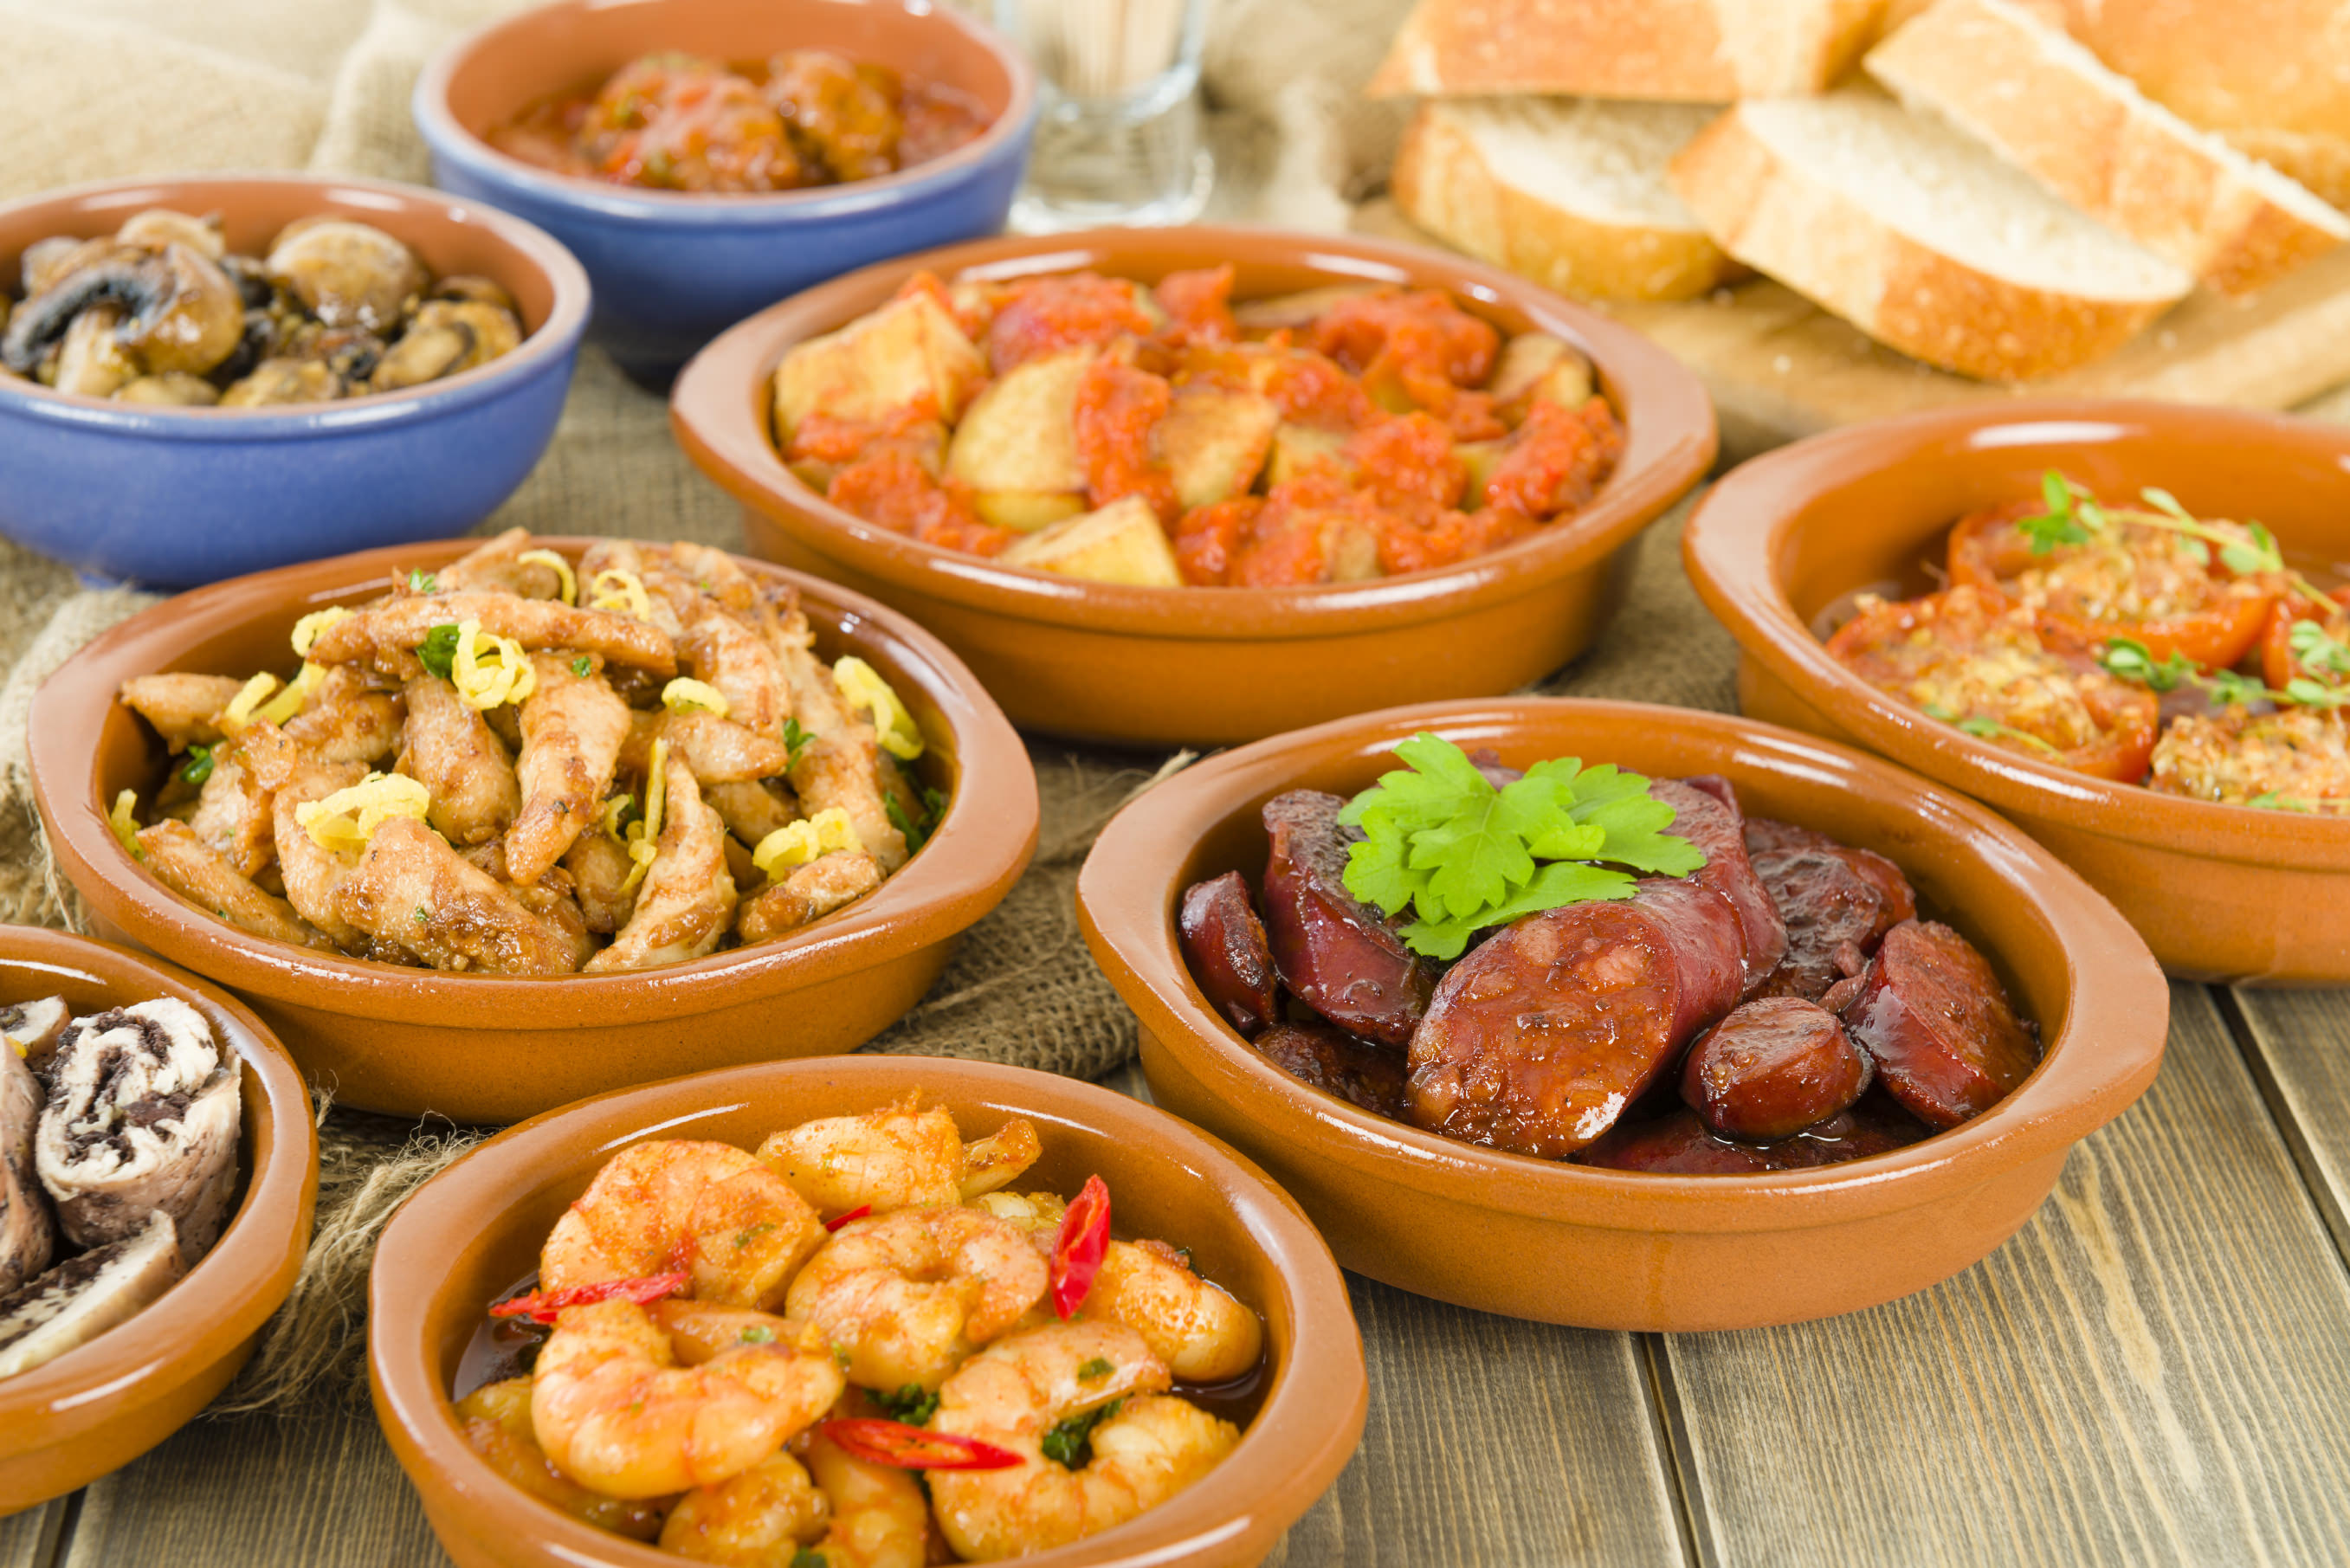 Spanish Tapas - The Cooking Academy